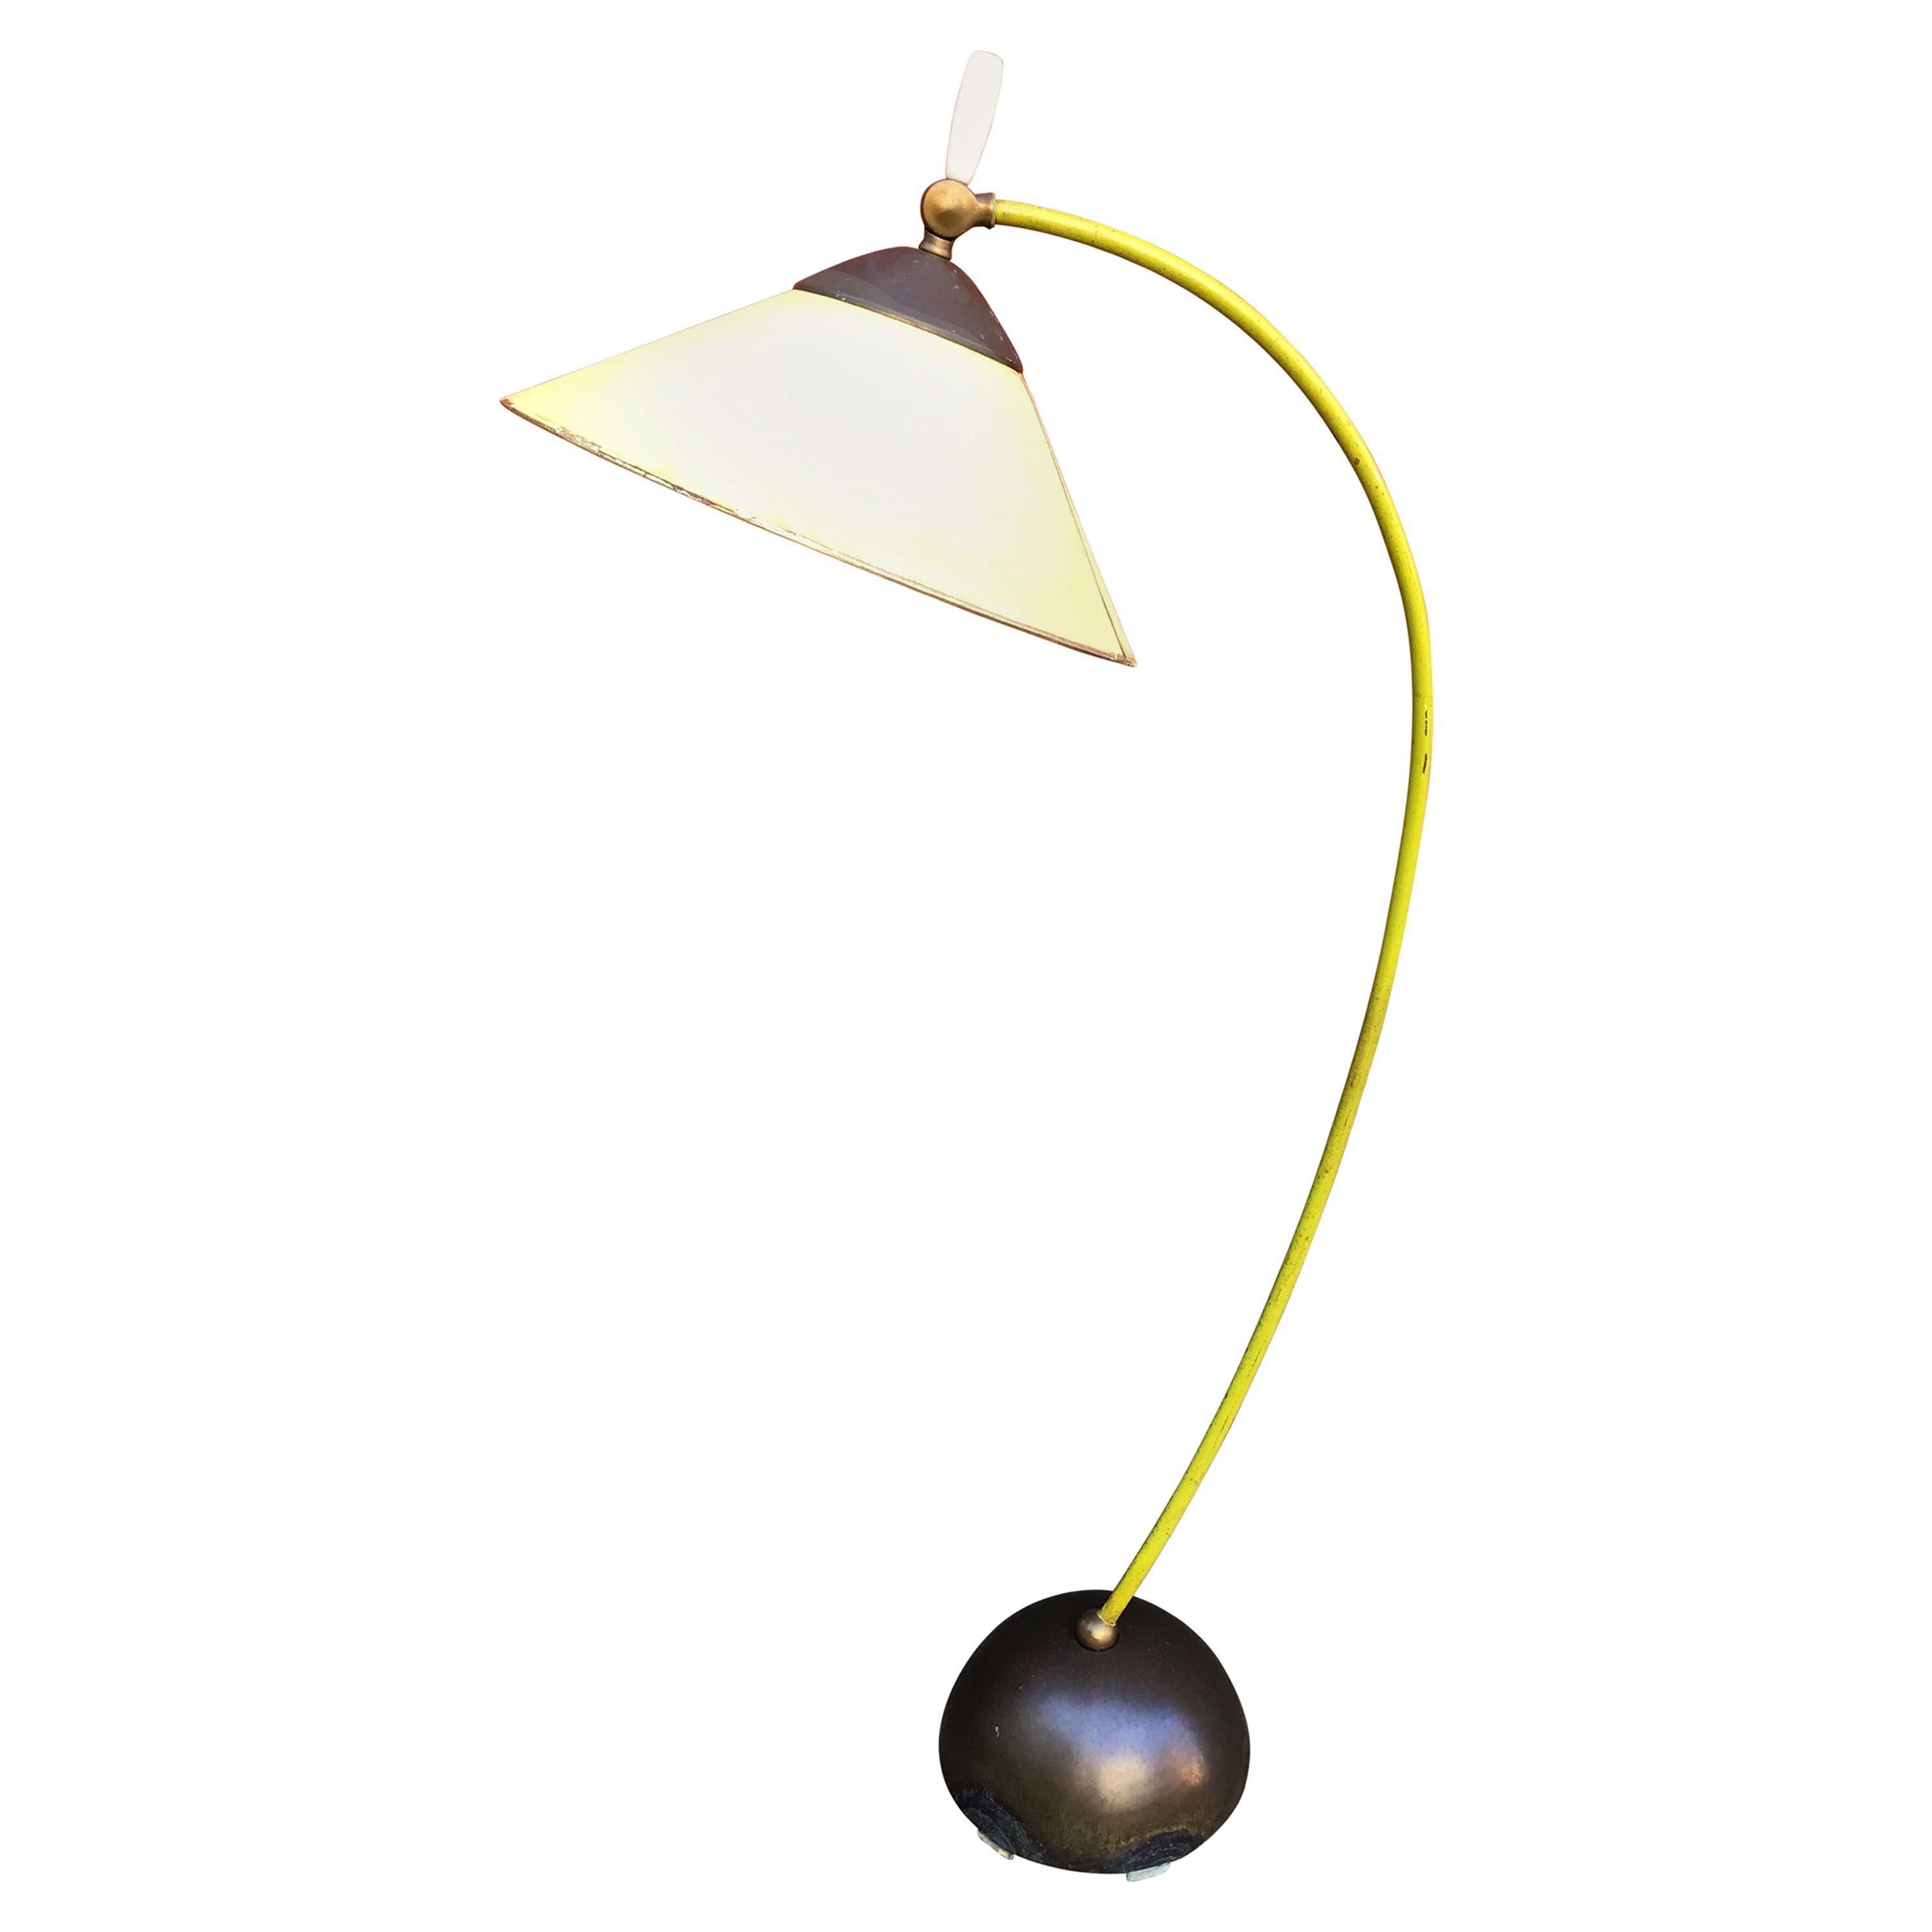 Russel Wright Pivoting Floor Lamp by Fairmont Lamp Company